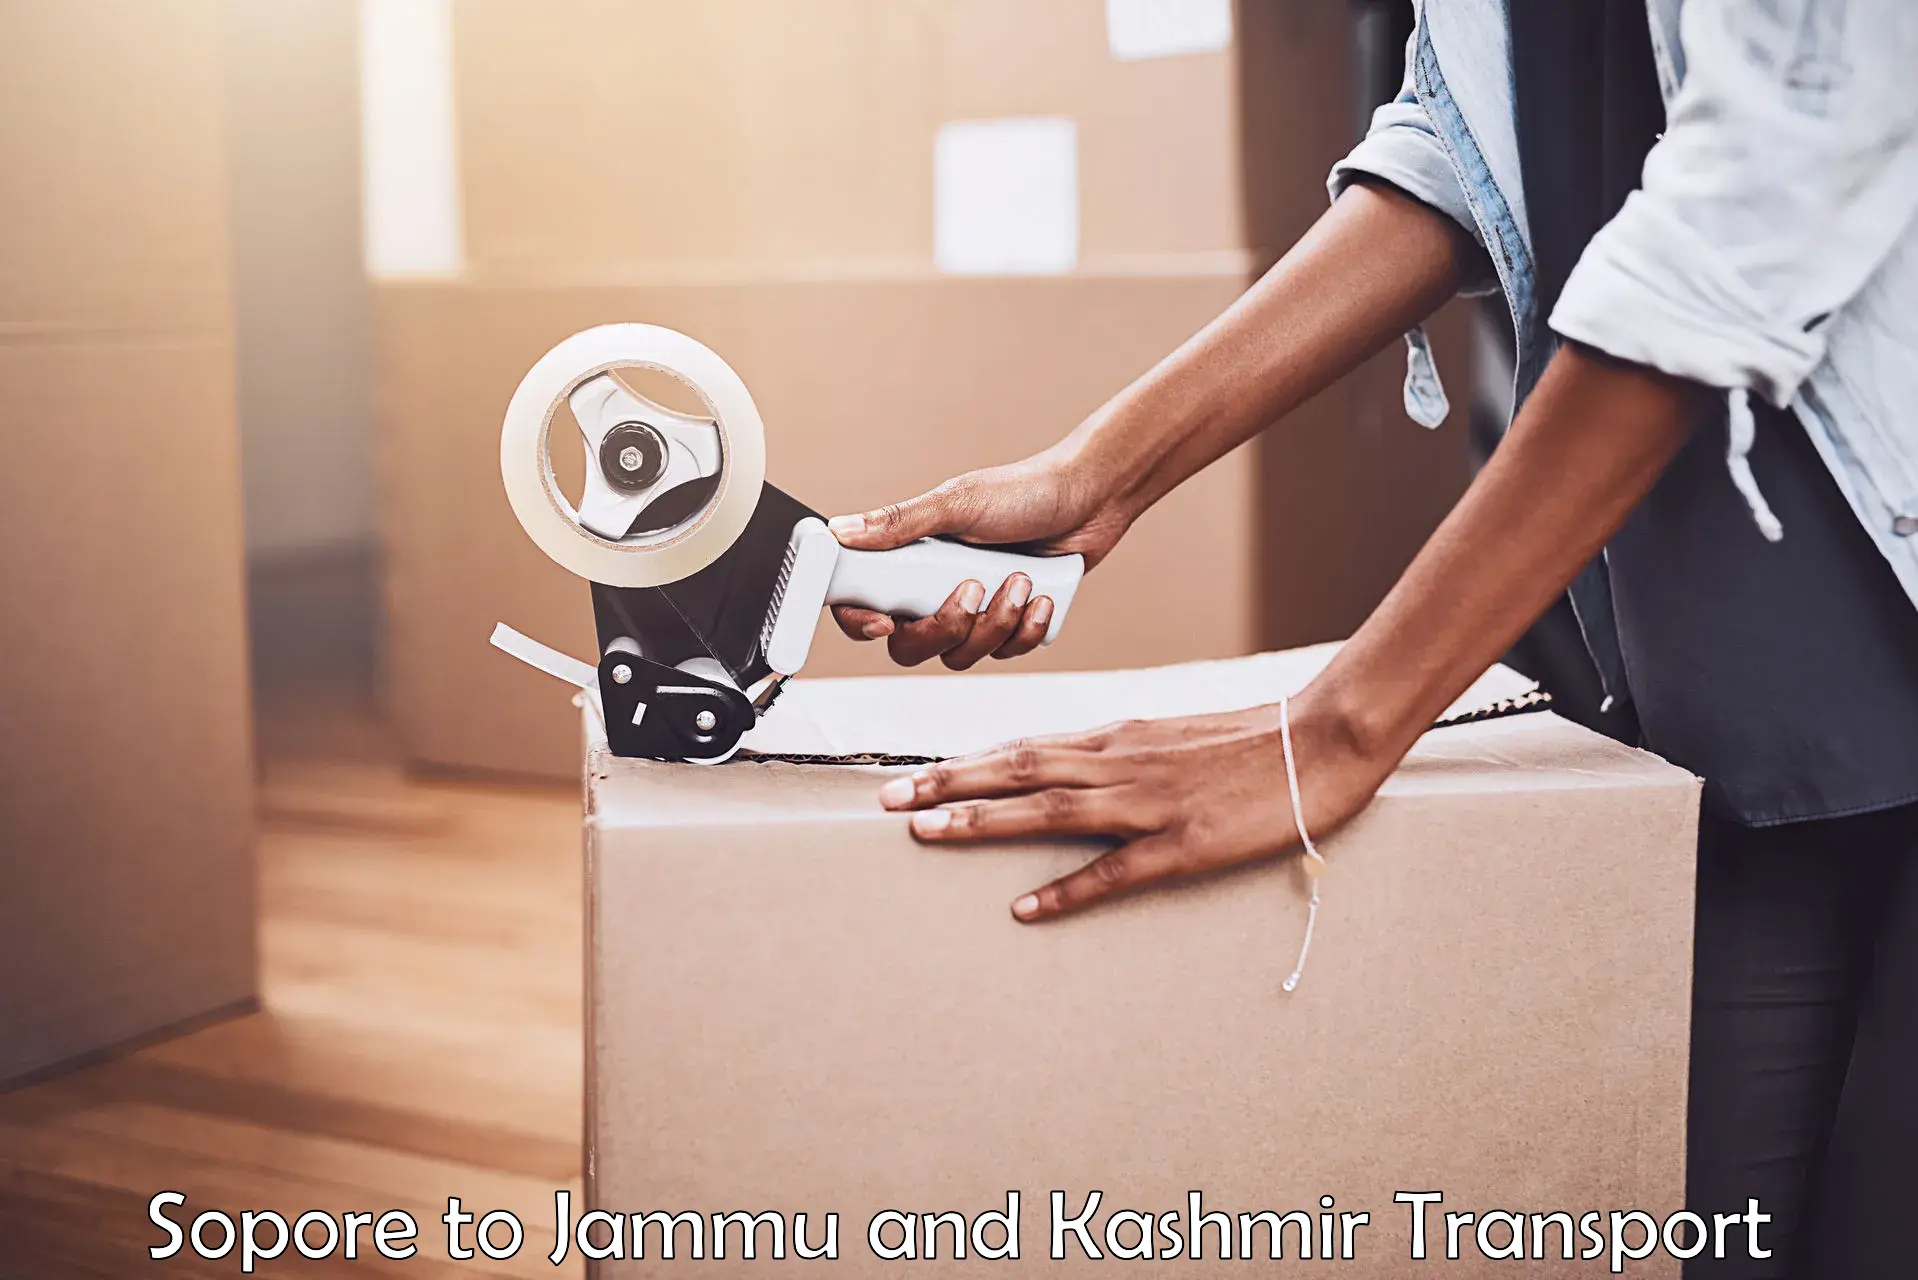 Shipping partner Sopore to Jammu and Kashmir